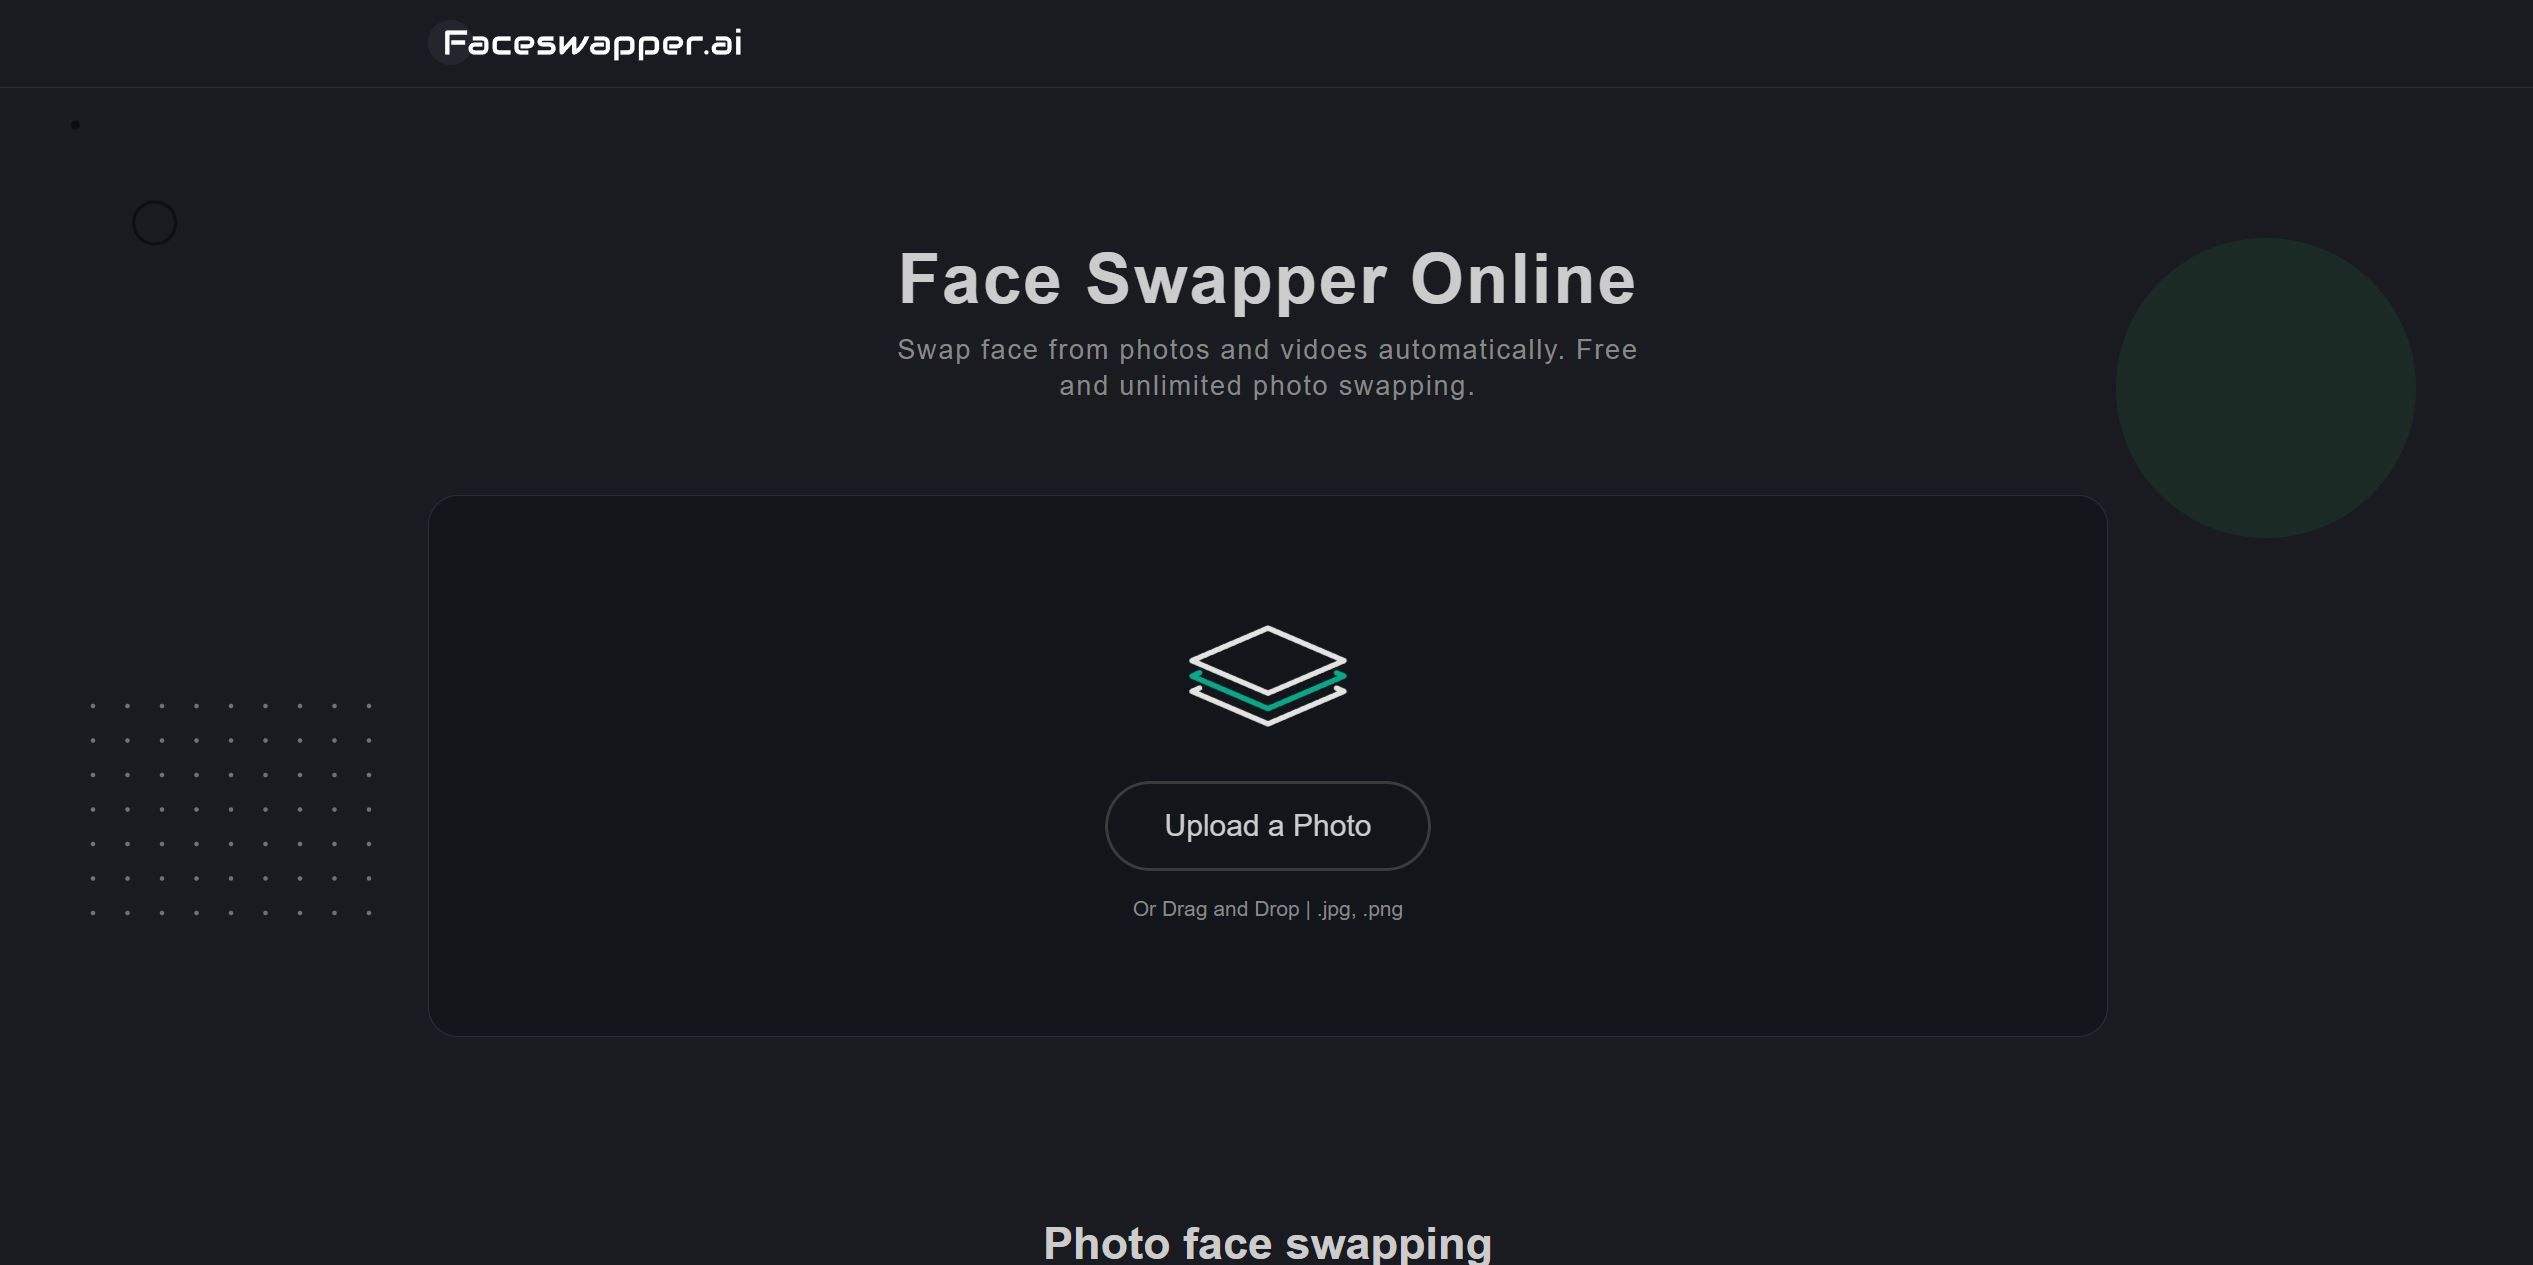 FaceSwapperFaceSwapper is an online tool for swapping faces in photos